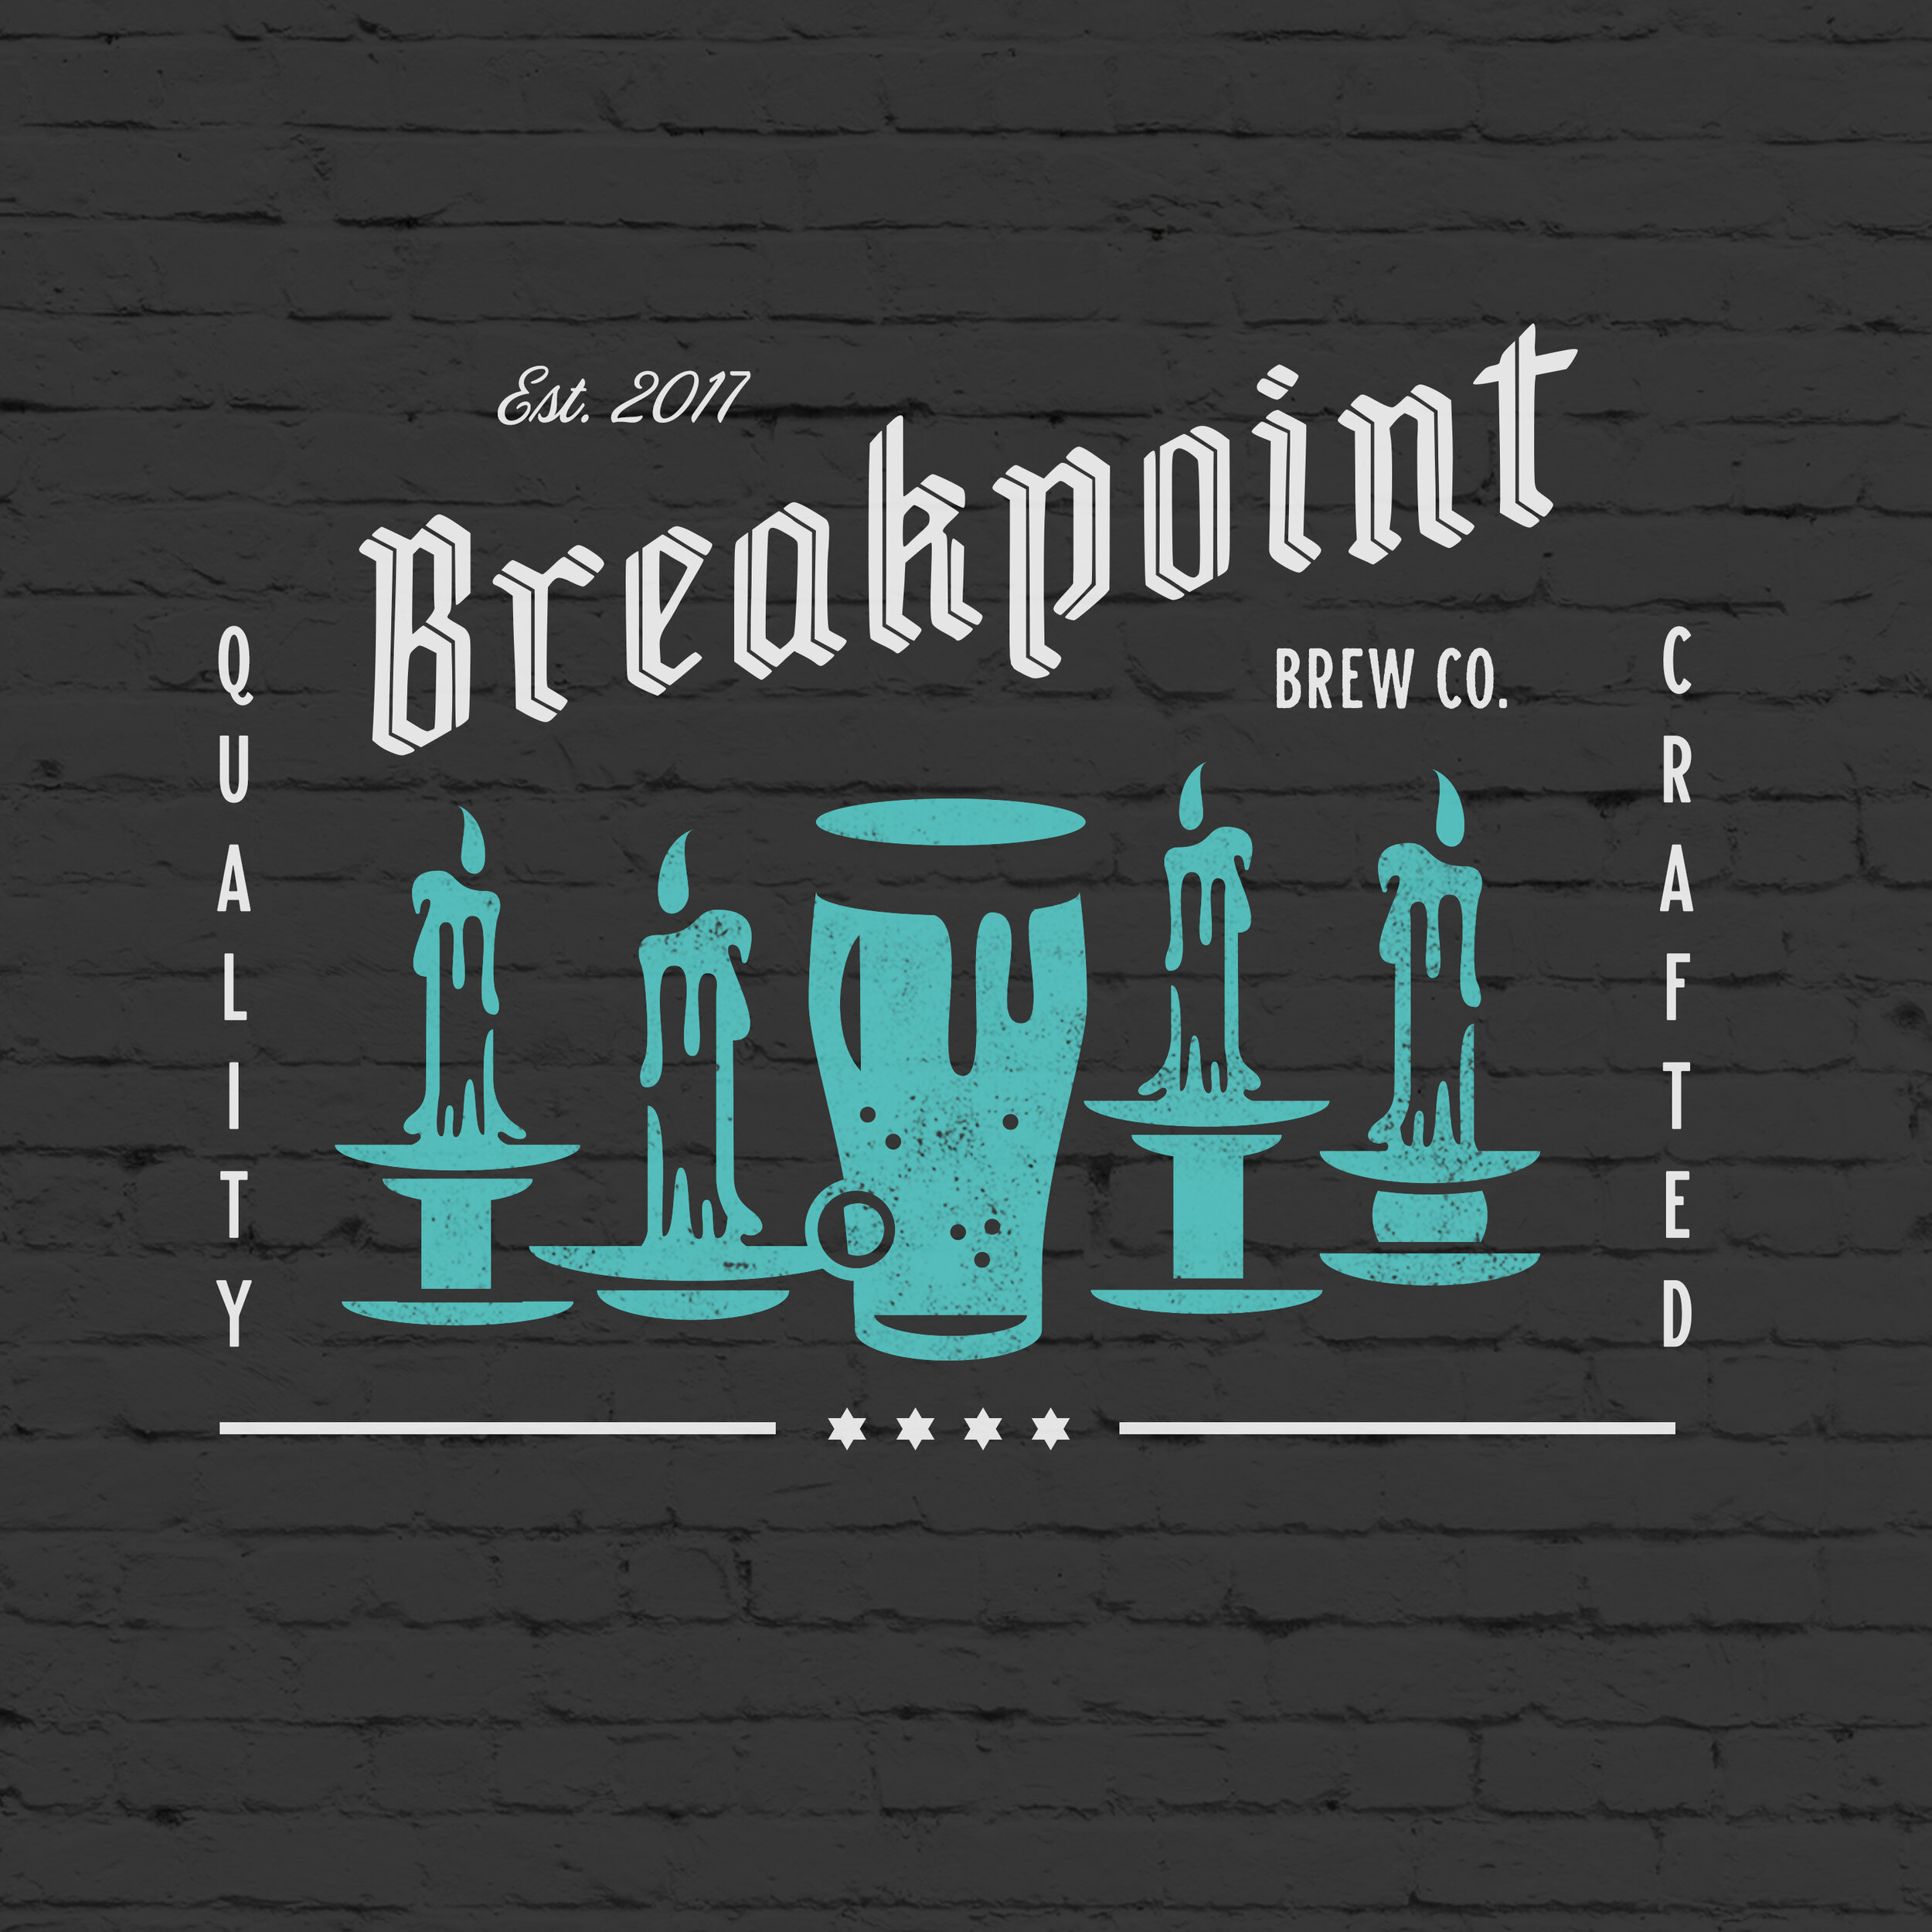 Breakpoint Brewing